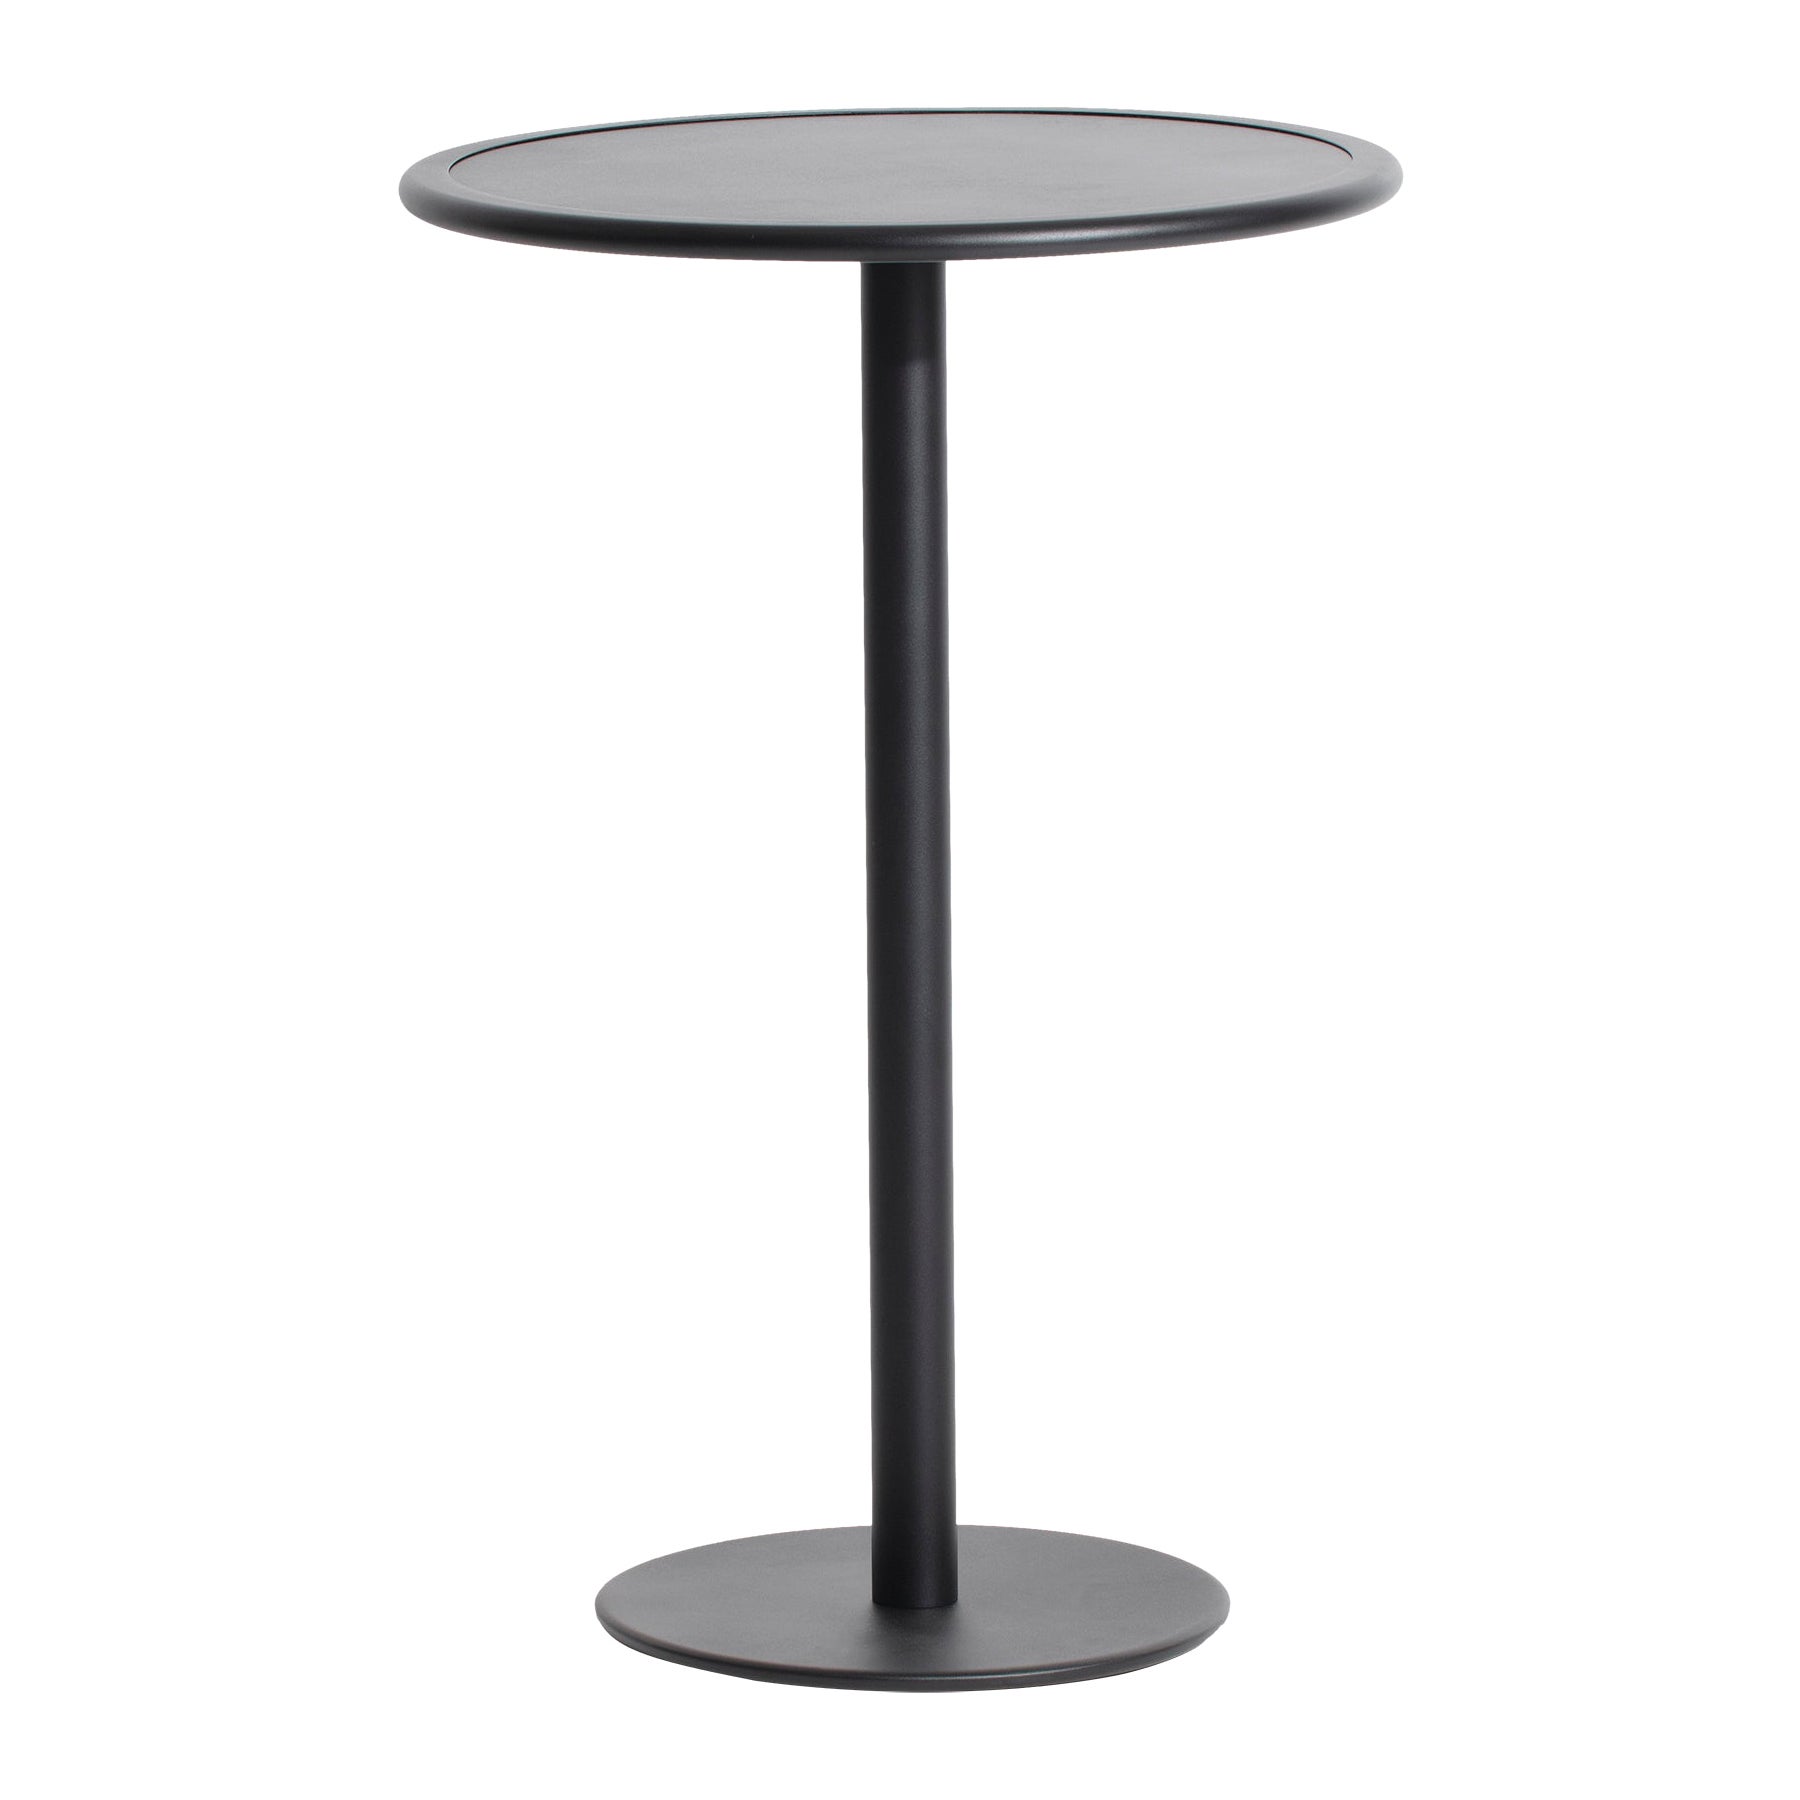 Petite Friture Week-End Round High Table in Black Aluminium, 2017 For Sale